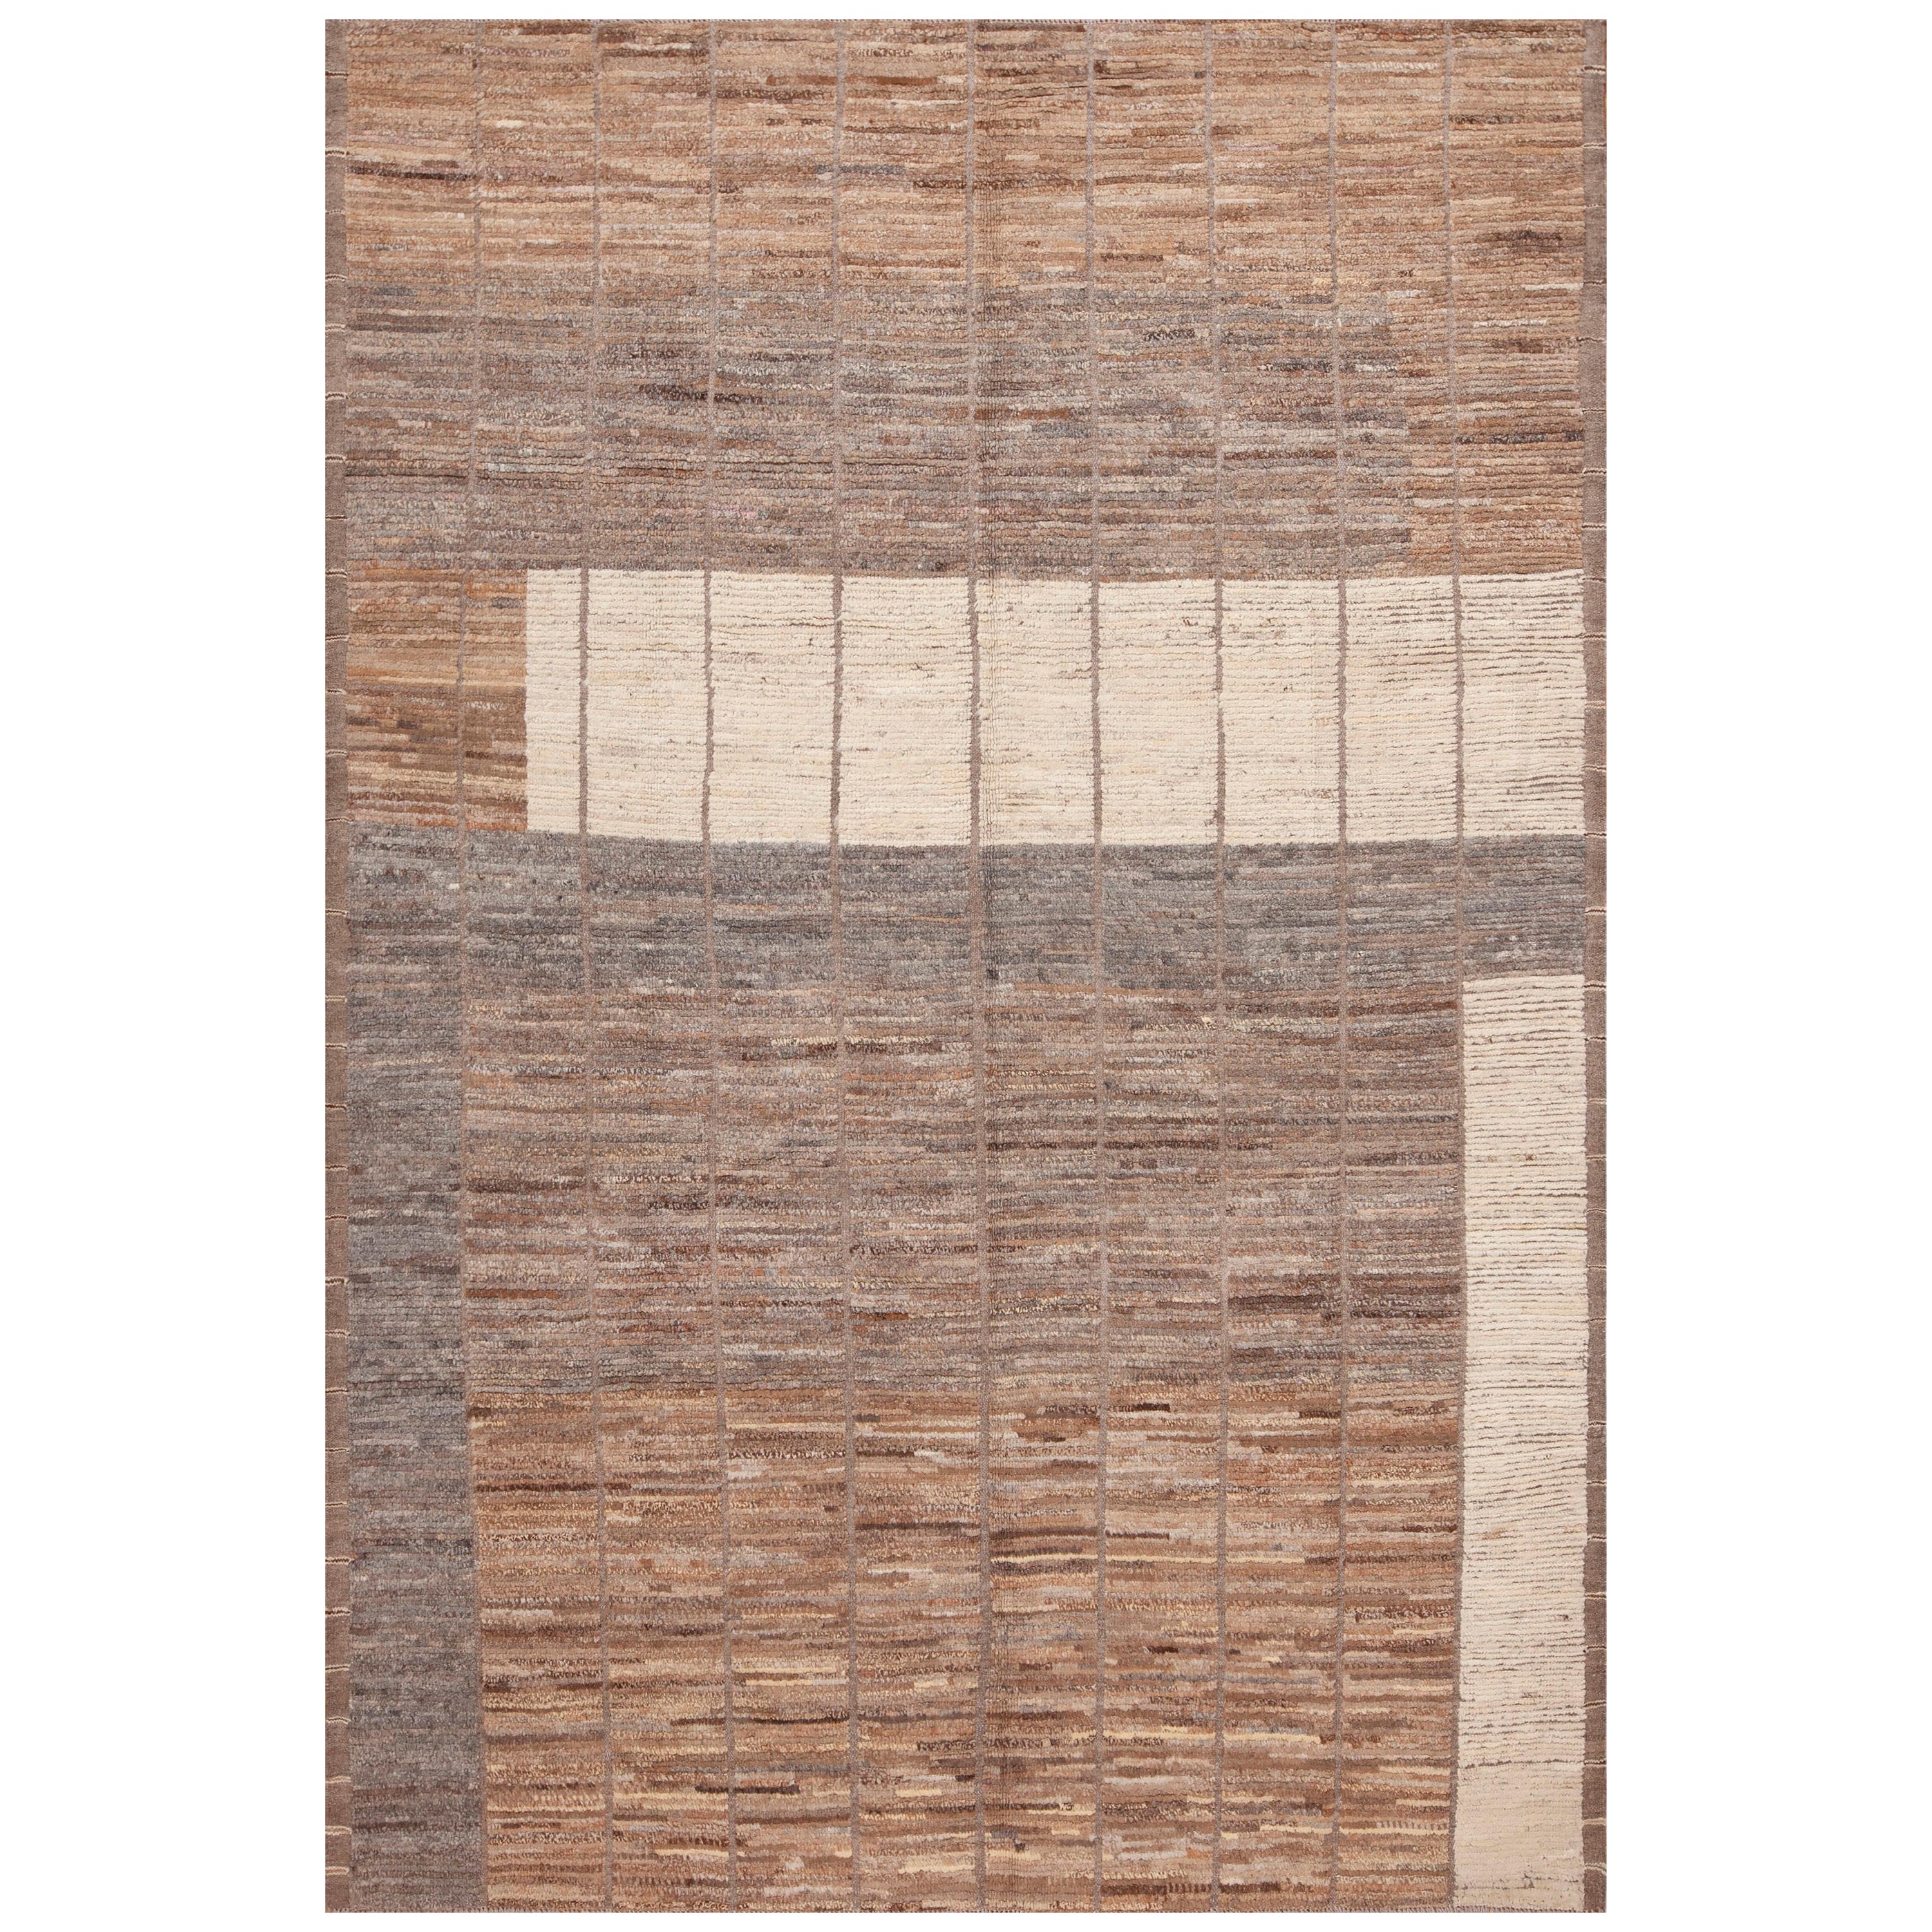 Nazmiyal Collection Neutrale Erde Farbe Modern Contemporary Area Rug 6'2" x 9'1" im Angebot